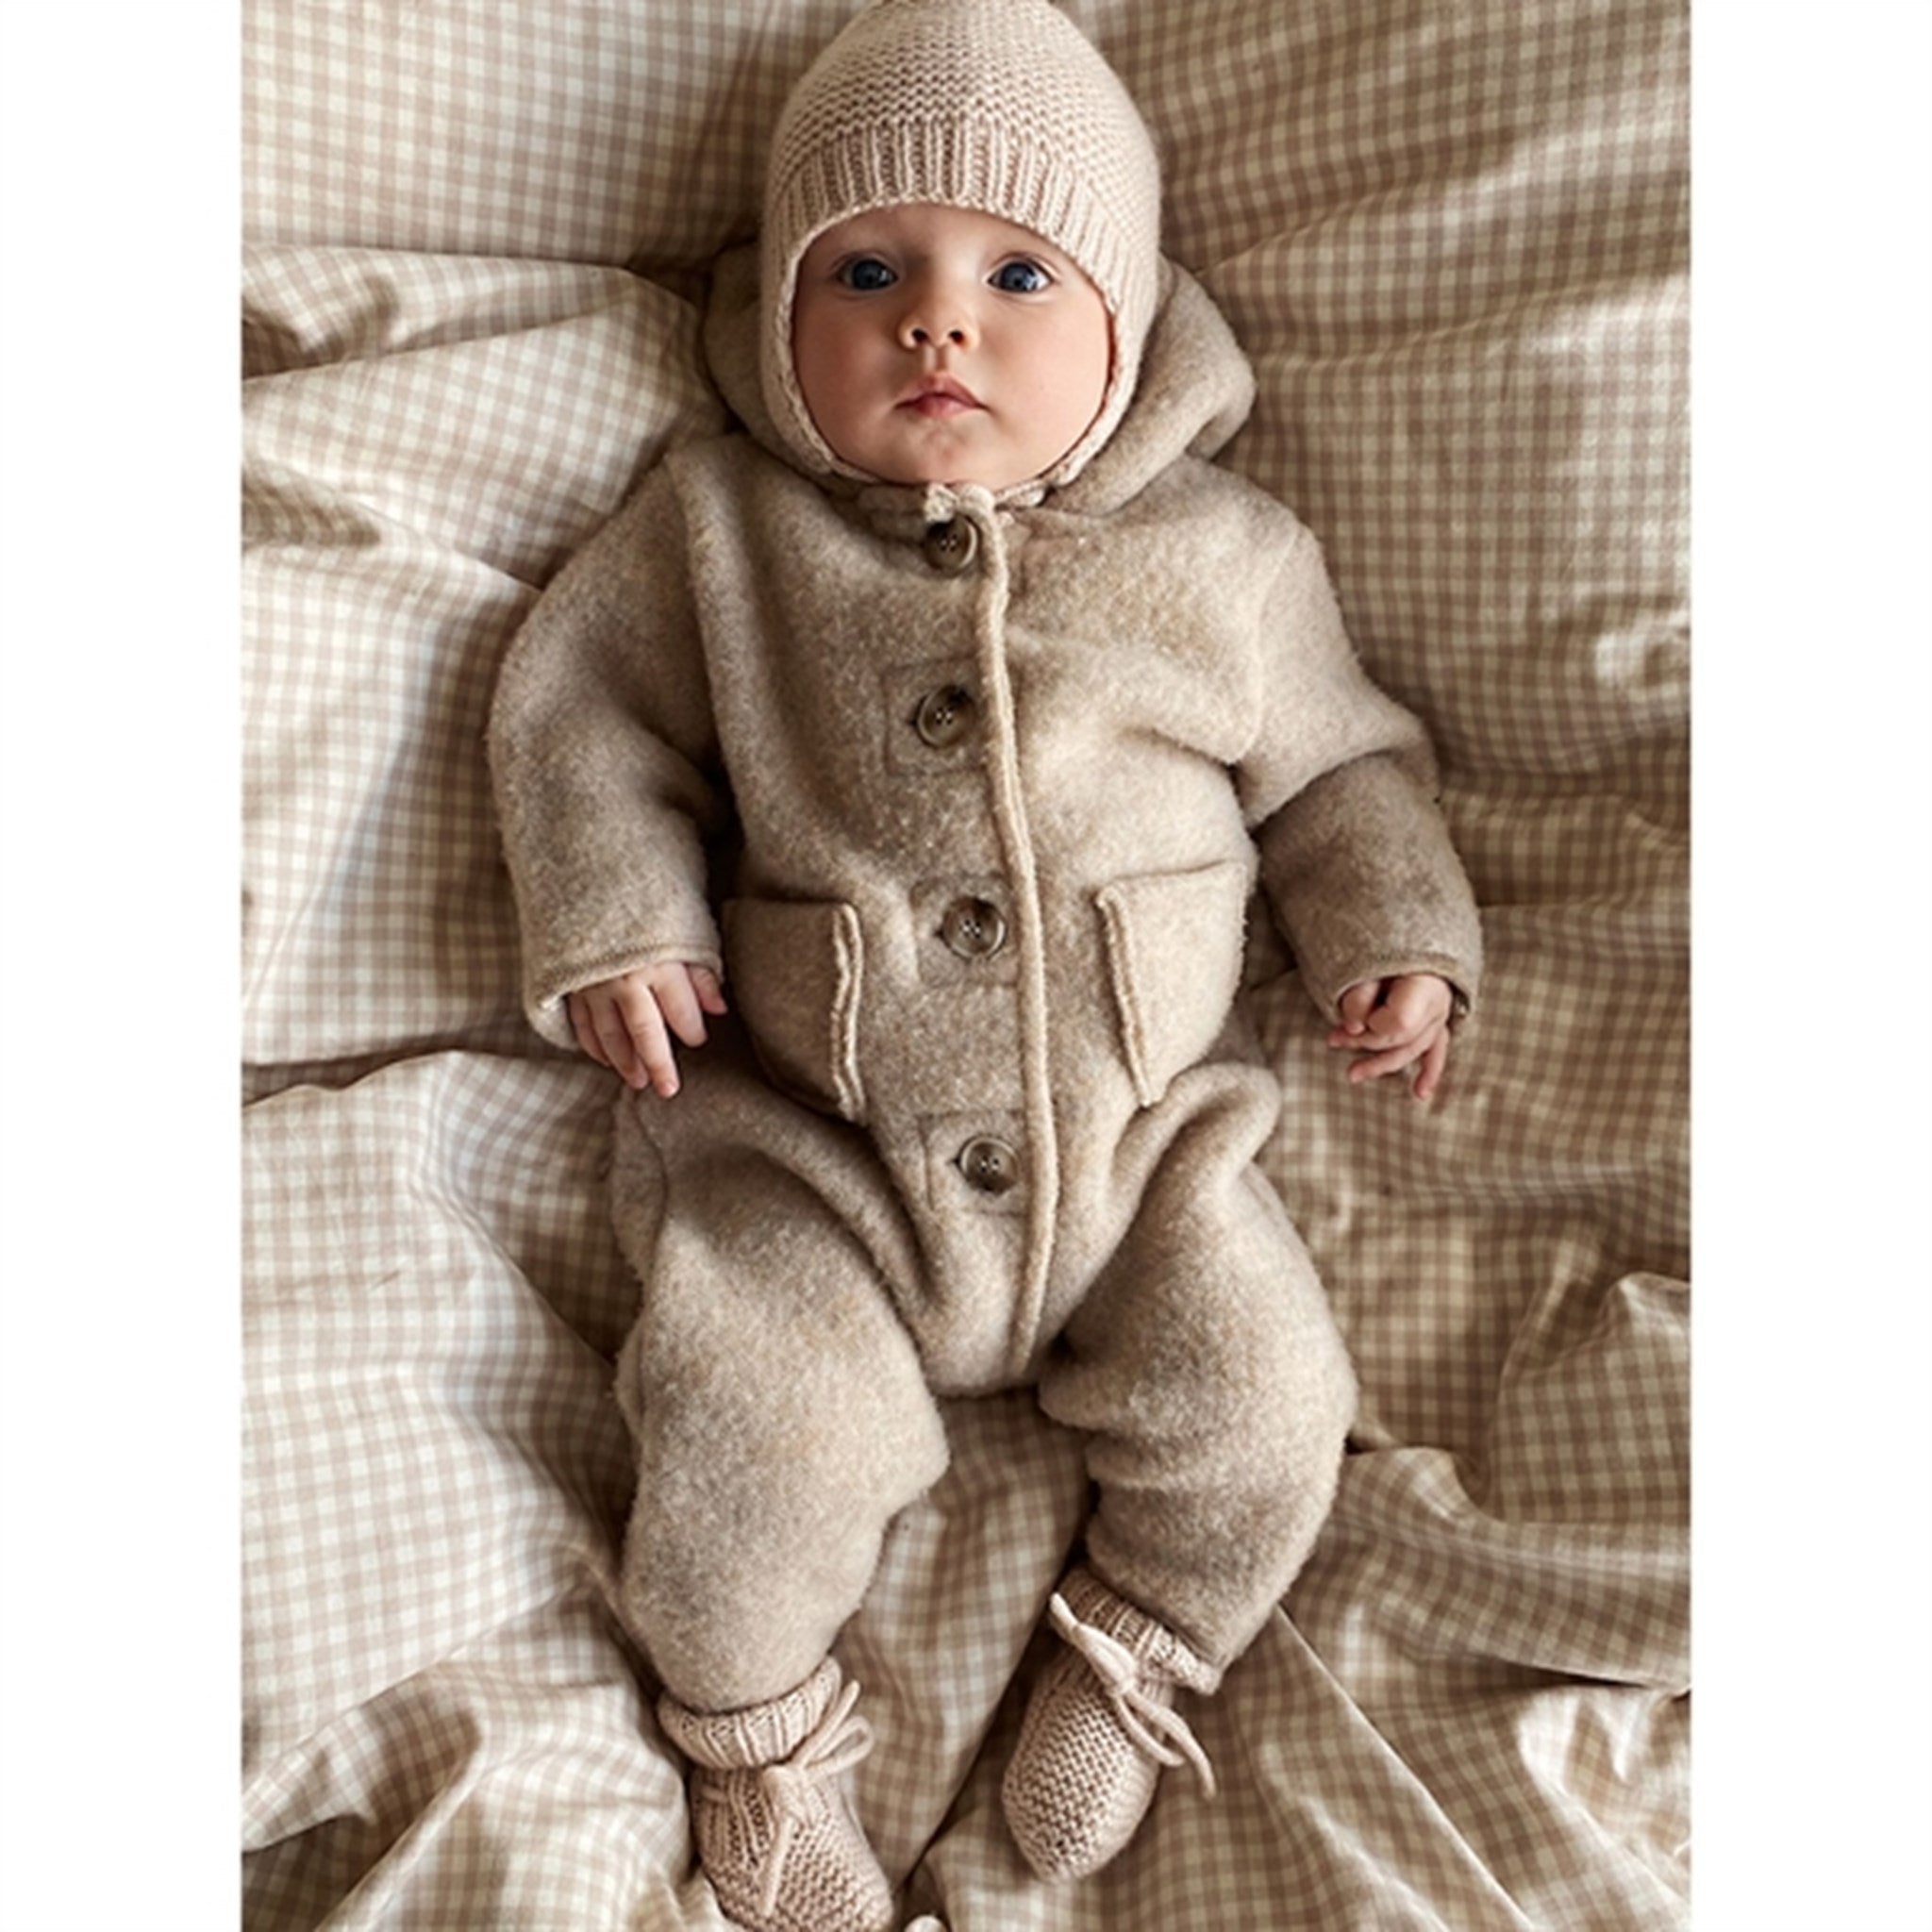 lalaby Oat Teddy Onesie 2